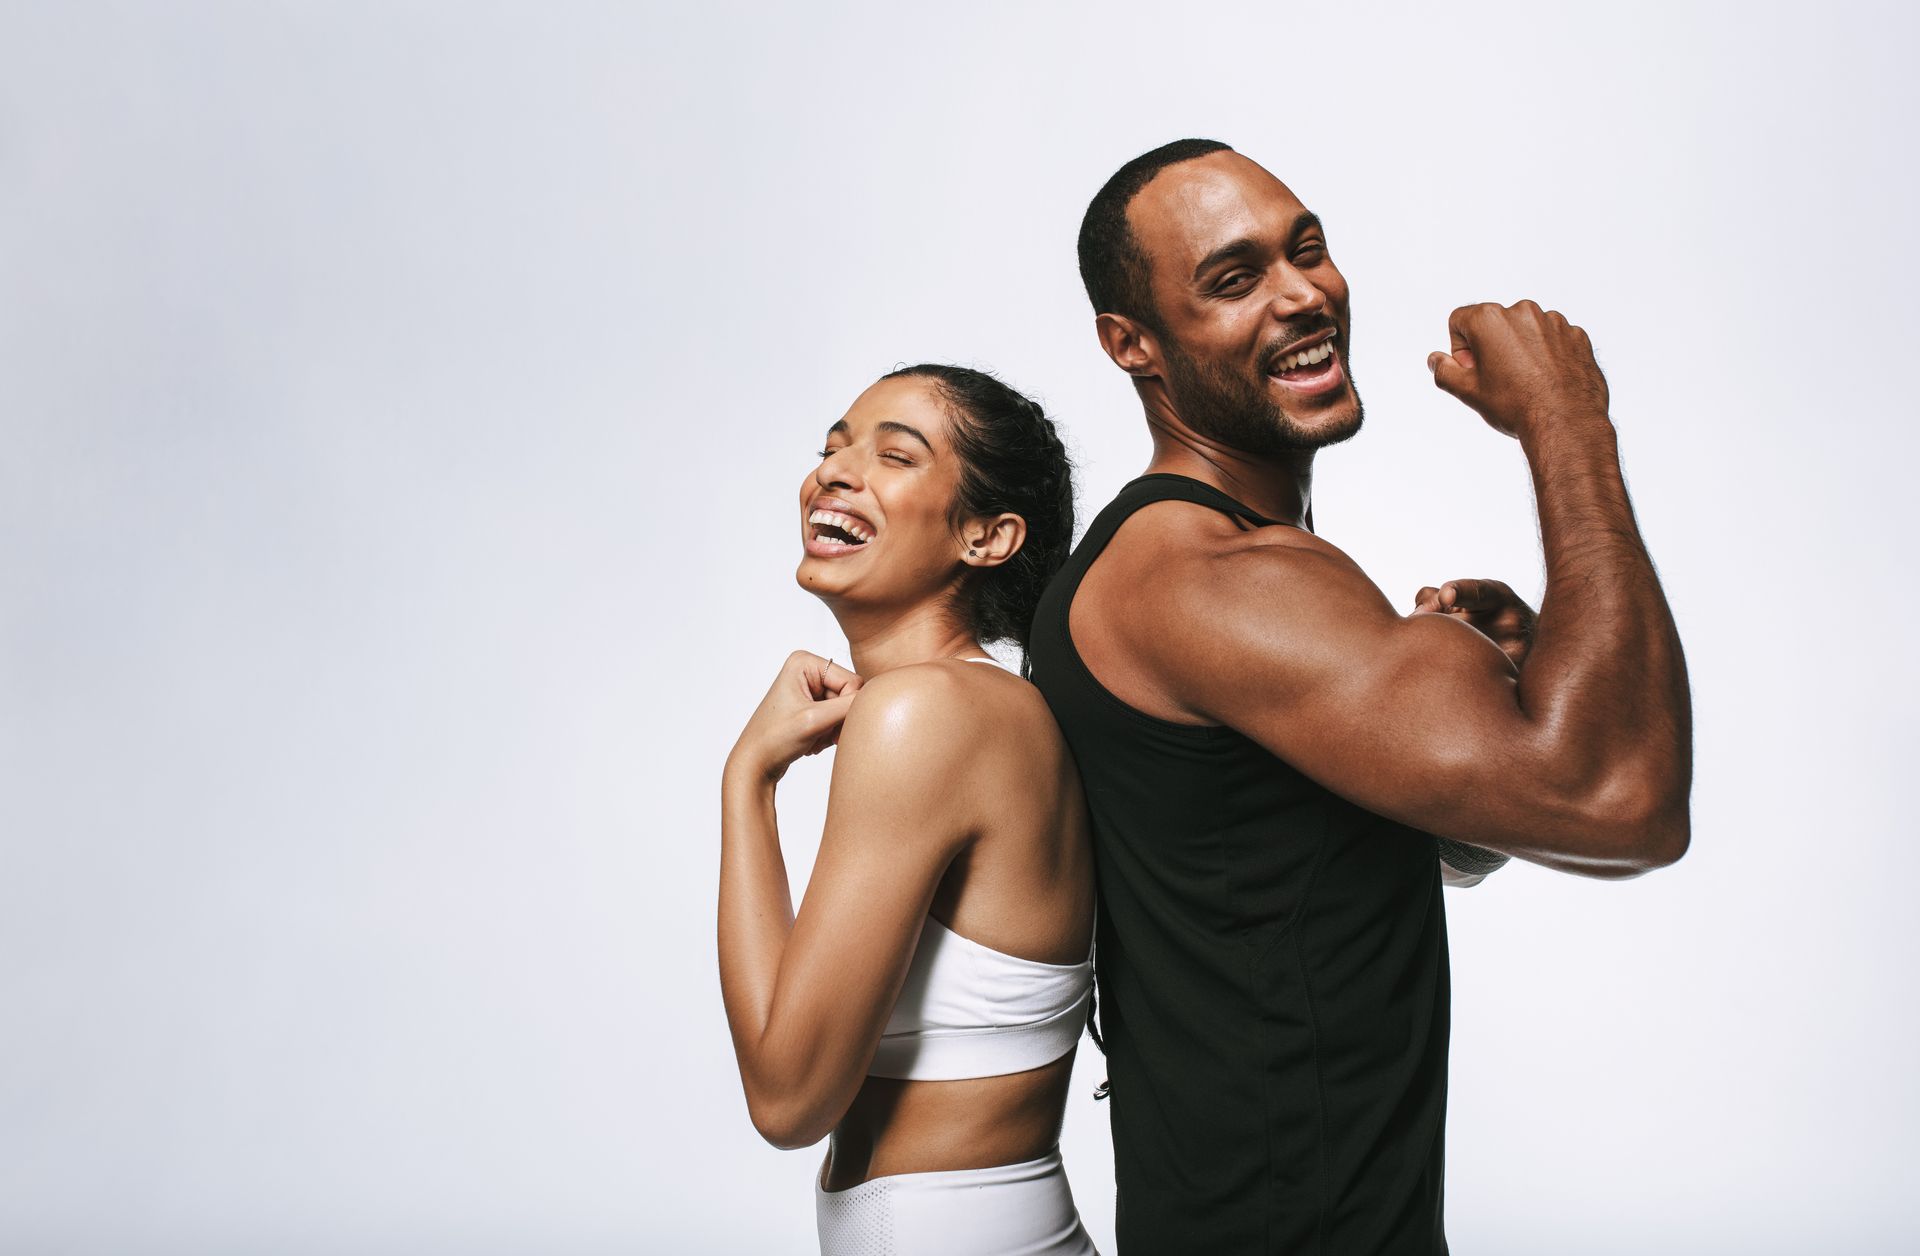 A man and a woman are standing back to back and flexing their muscles.